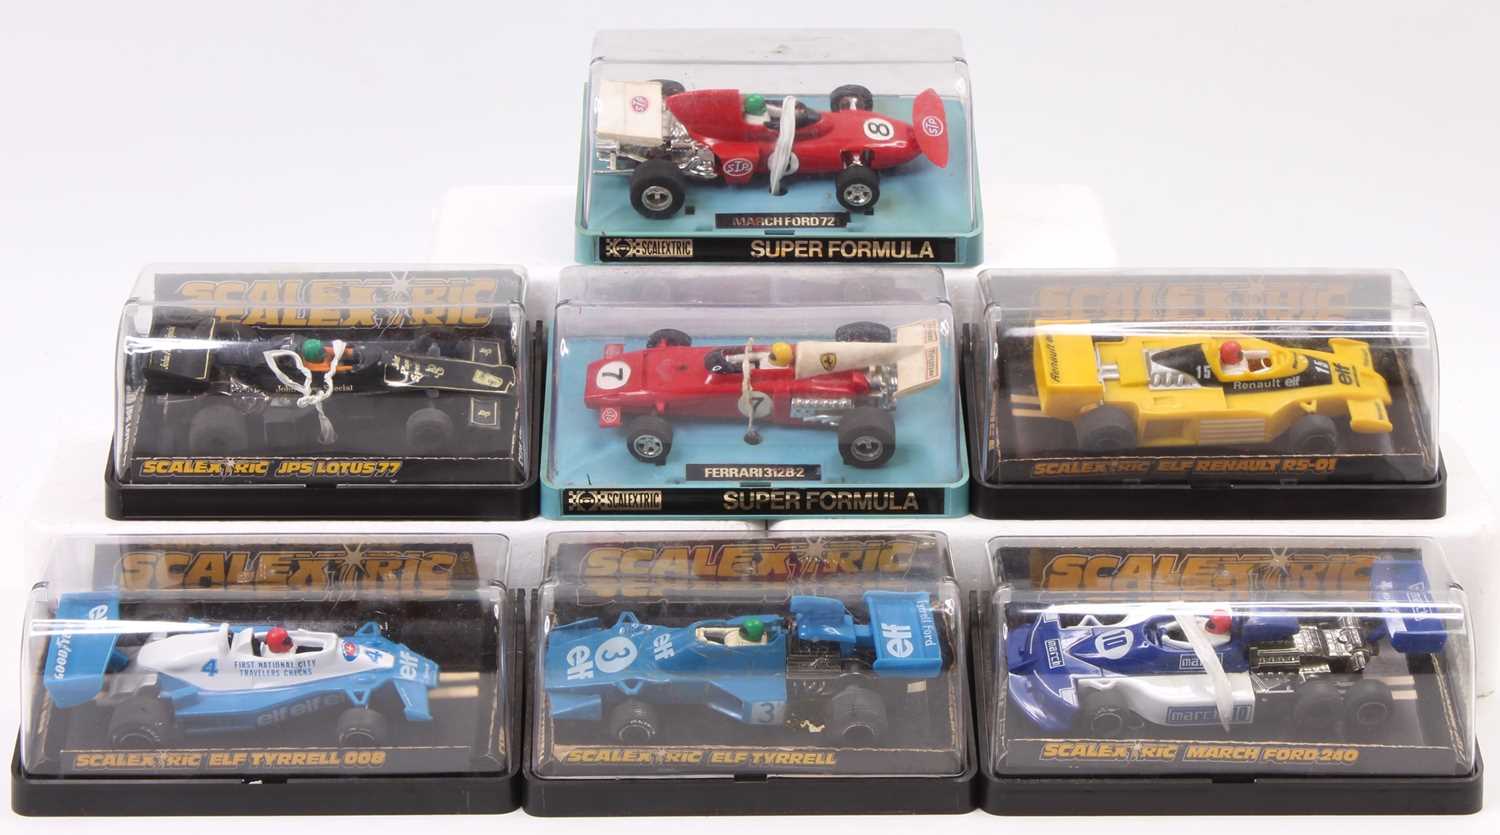 7 various boxed Scalextric Formula 1 slot cars including Nos. C129 March Ford 240, C134 Elf